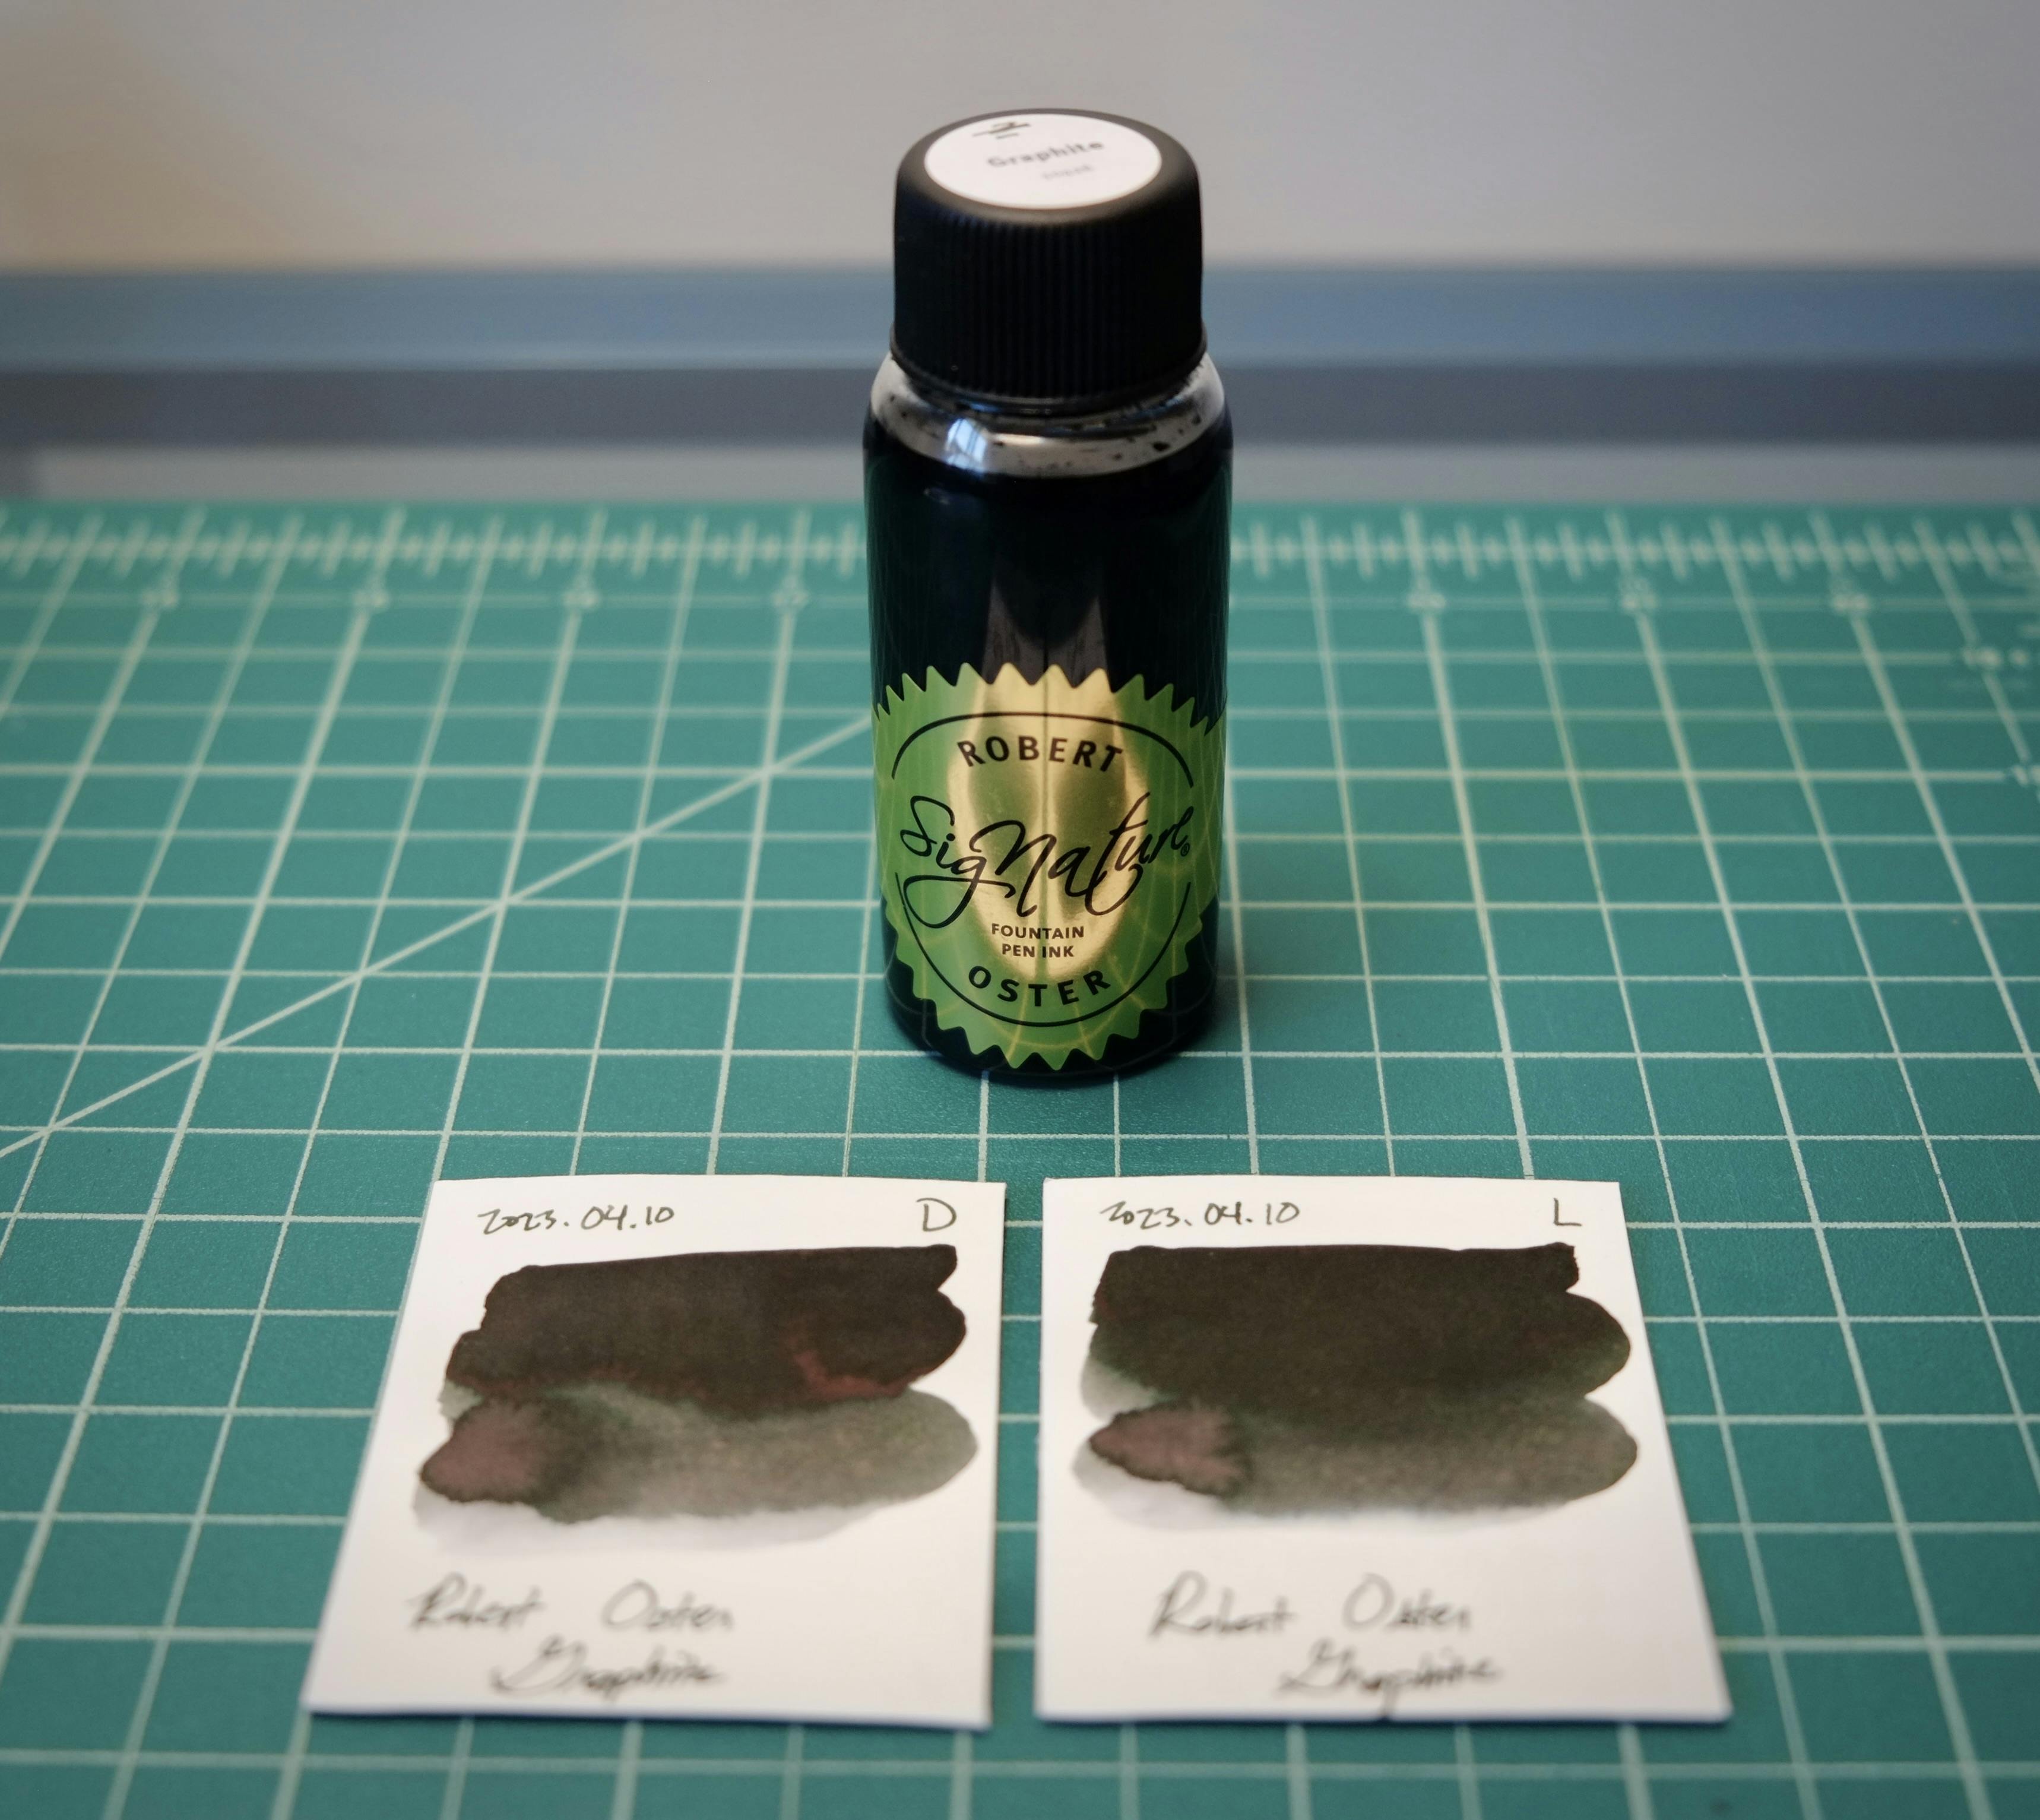 A bottle of Robert Oster Graphite ink on a desk, behind two color swatches